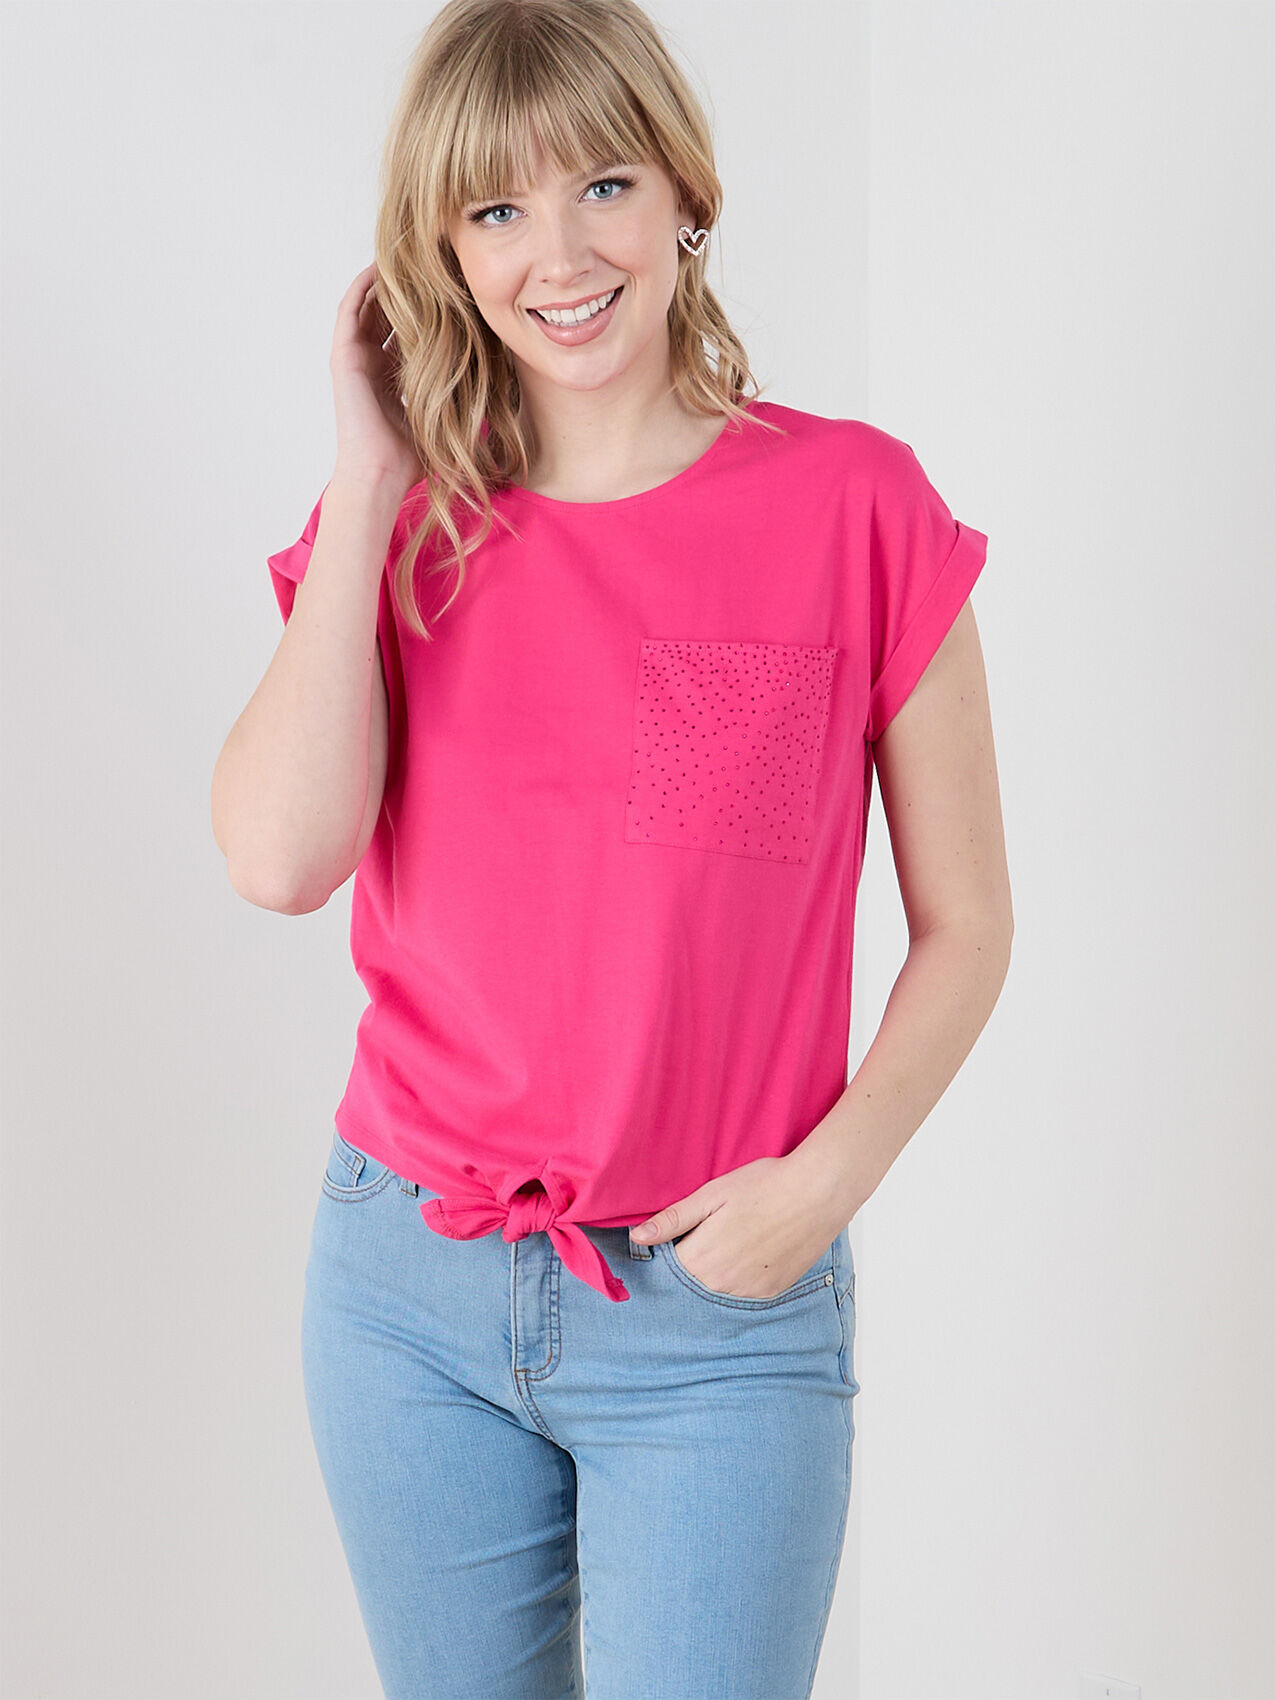 Tie Front Top with Bejeweled Pocket Detail by GG Collection